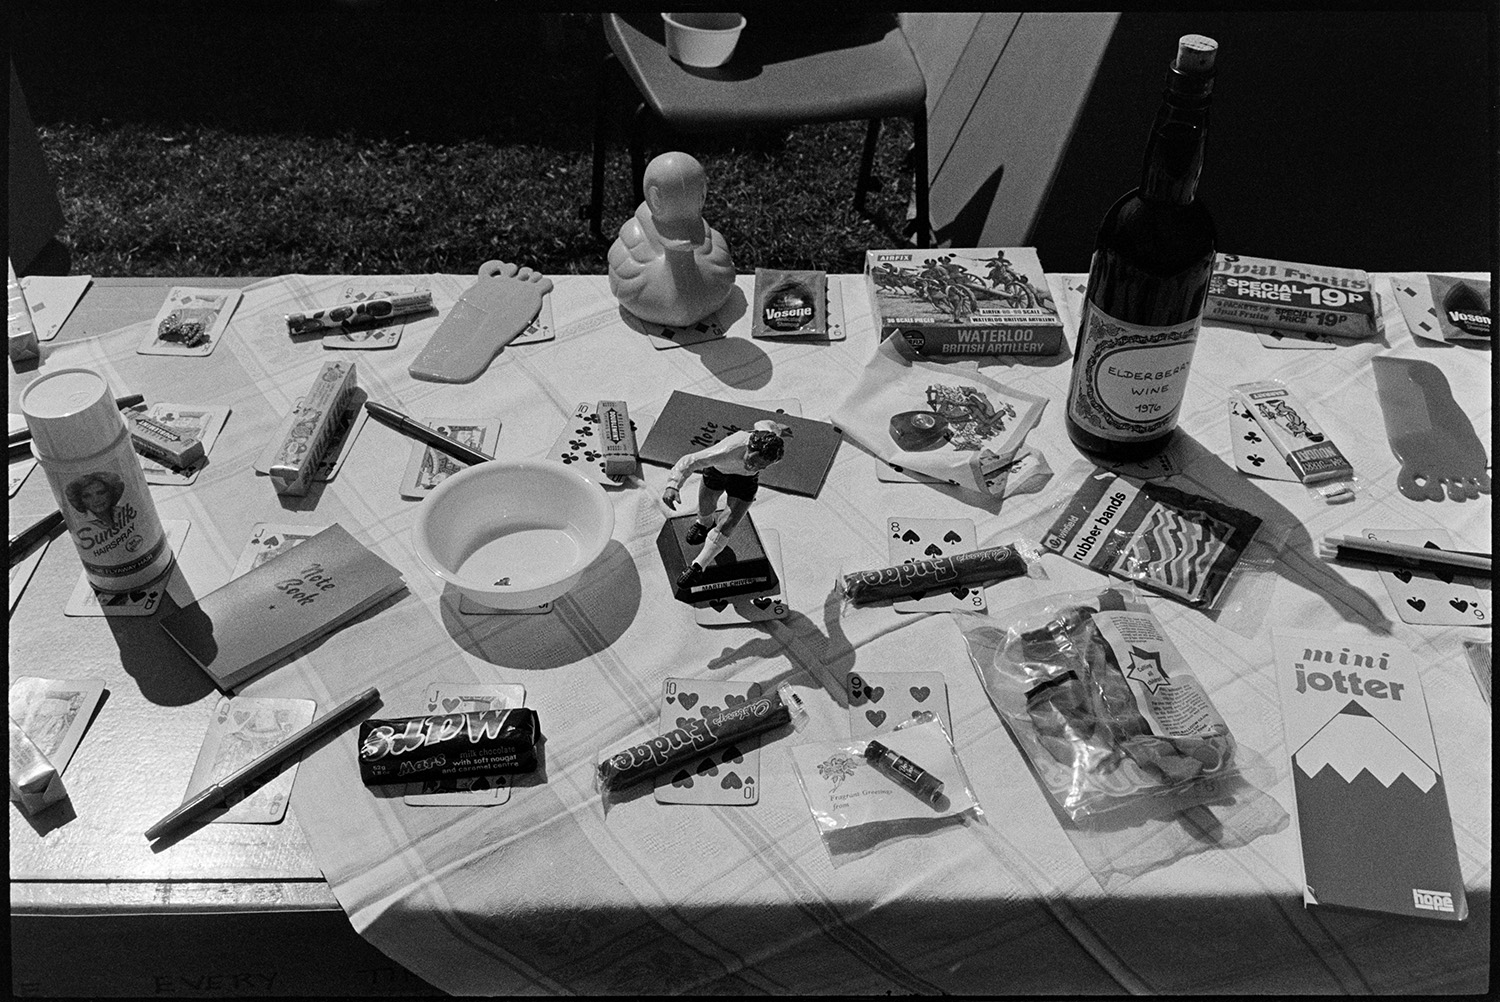 Items for sale, stall at fete. 
[Prizes which can be won on a game at Atherington fete. Each prize is on a playing card. Prizes include chocolate bars, notebooks, wine and figurines.]